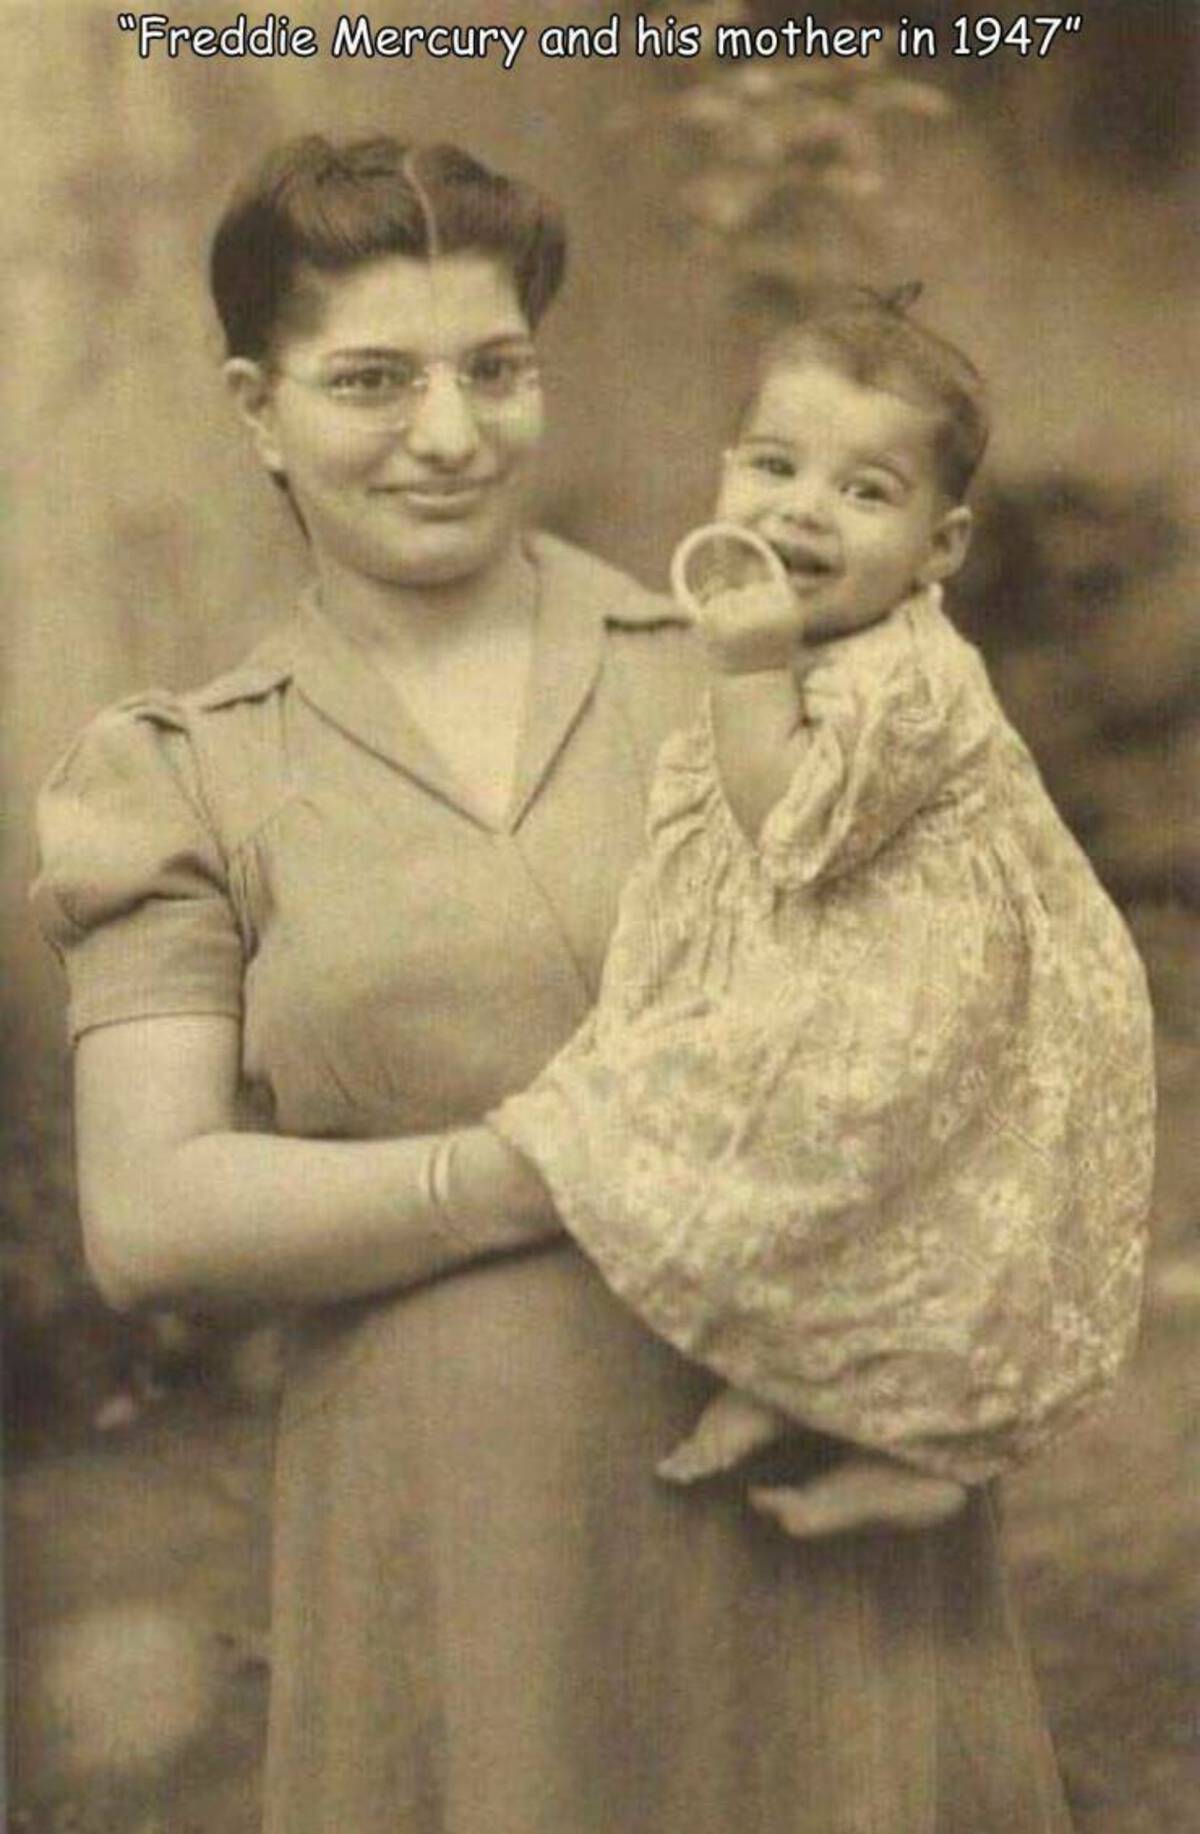 freddie mercury with his mother - "Freddie Mercury and his mother in 1947"